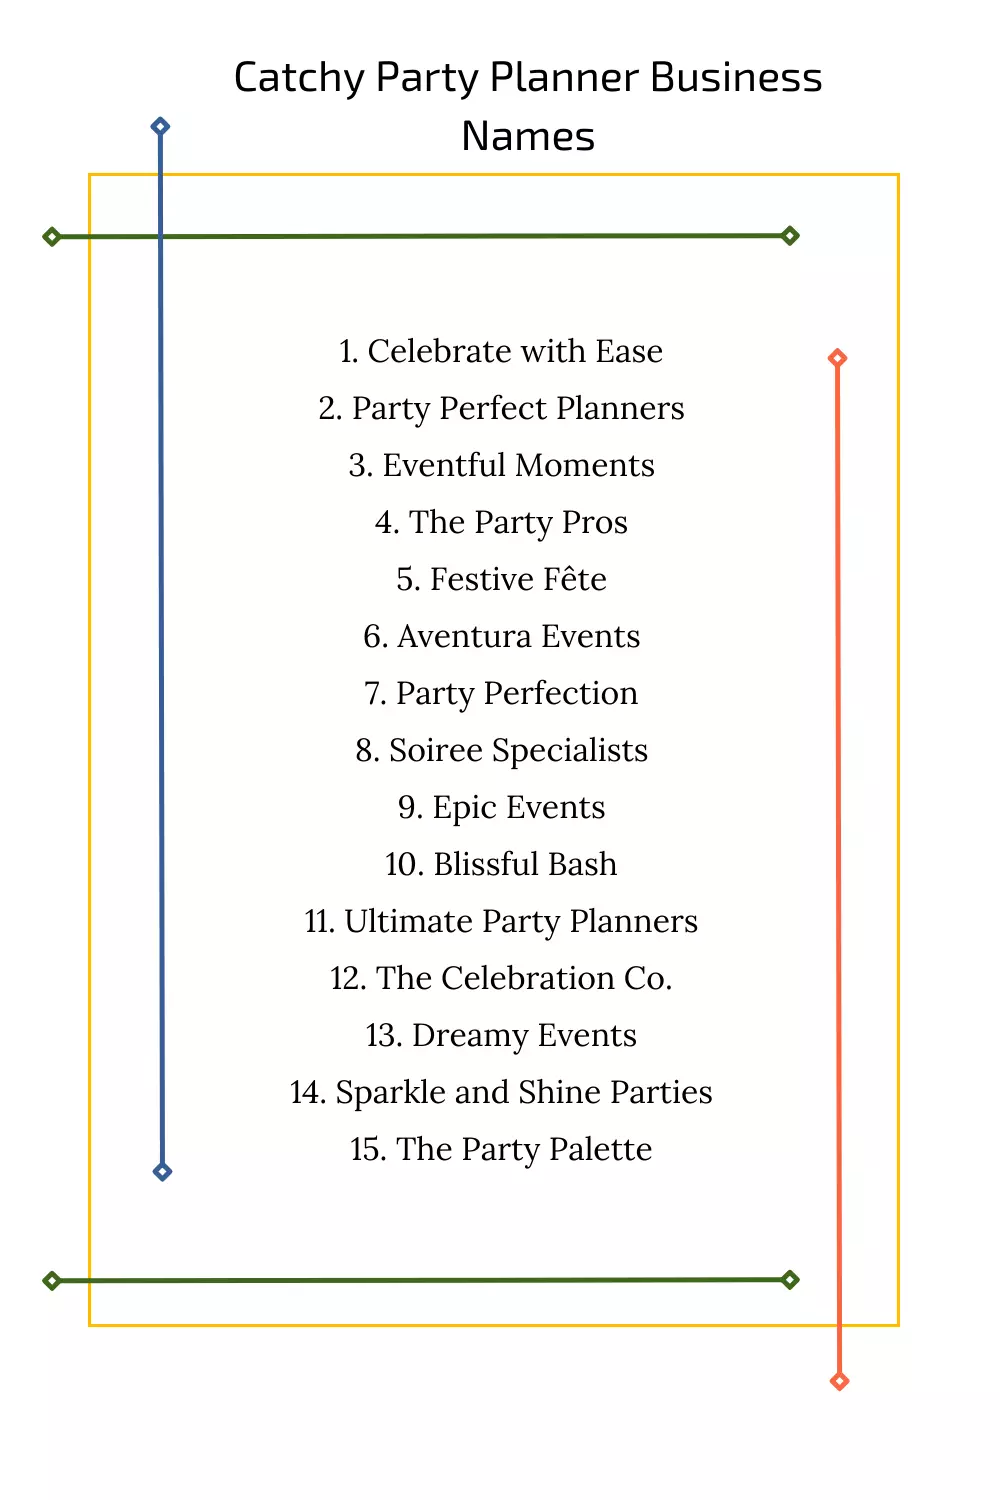 Creative Party Planner Business Names